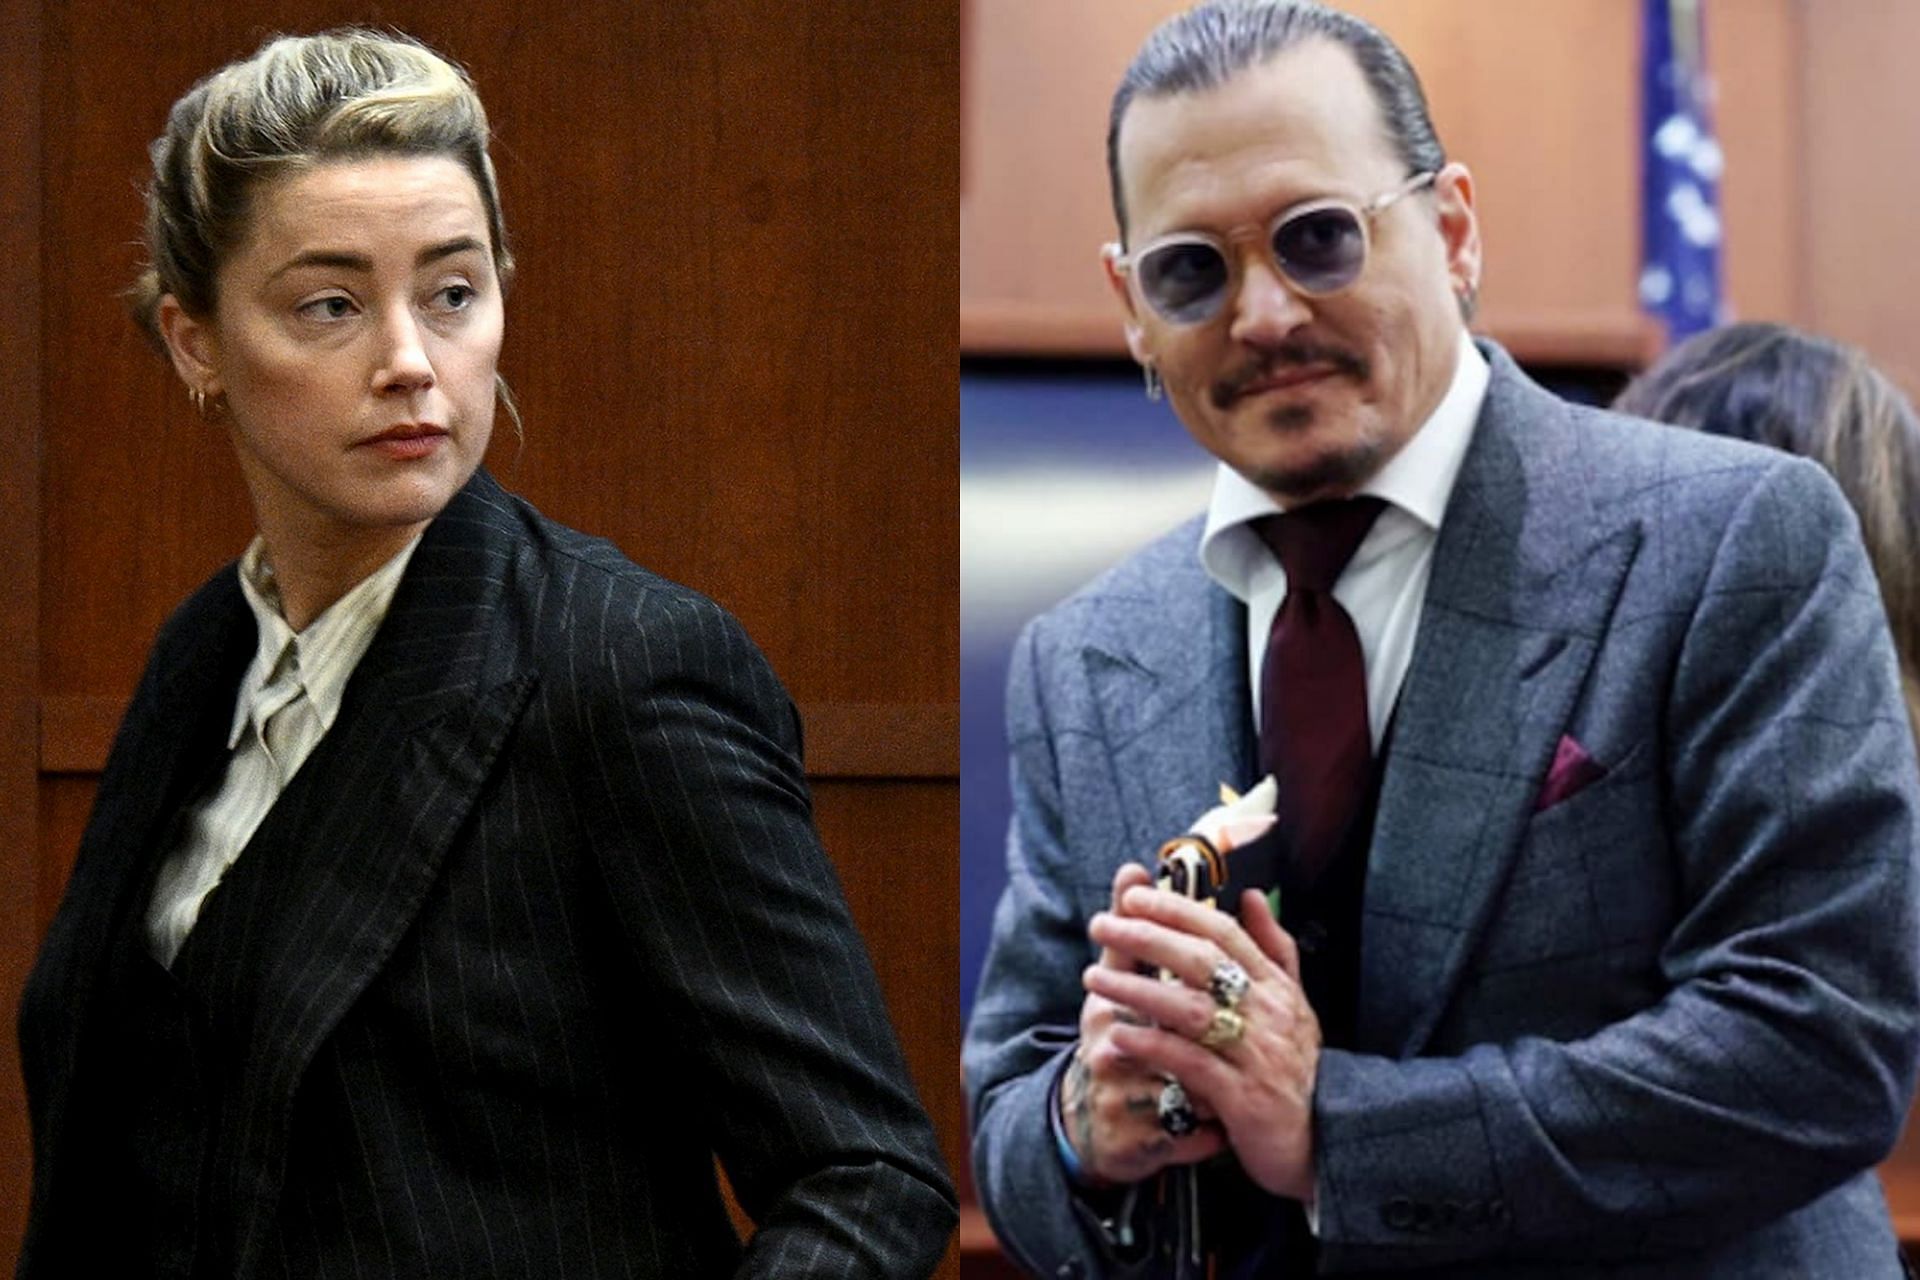 CodeMiko questions mainstream media for 'protecting' Amber Heard